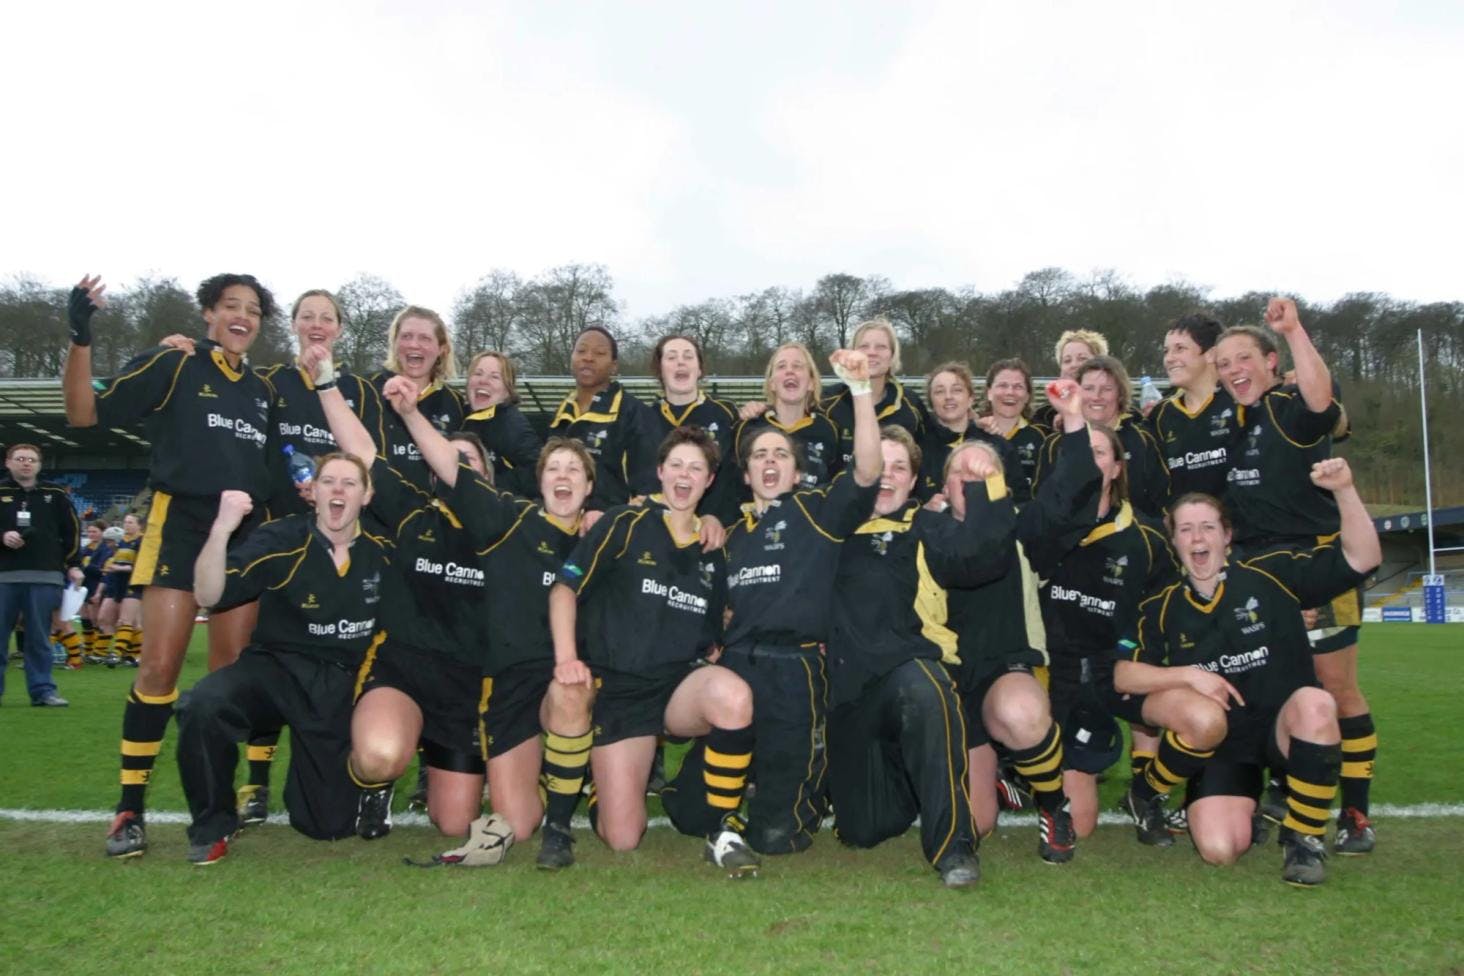 Wasps Women's Rugby 2003 1 XV after winning National League